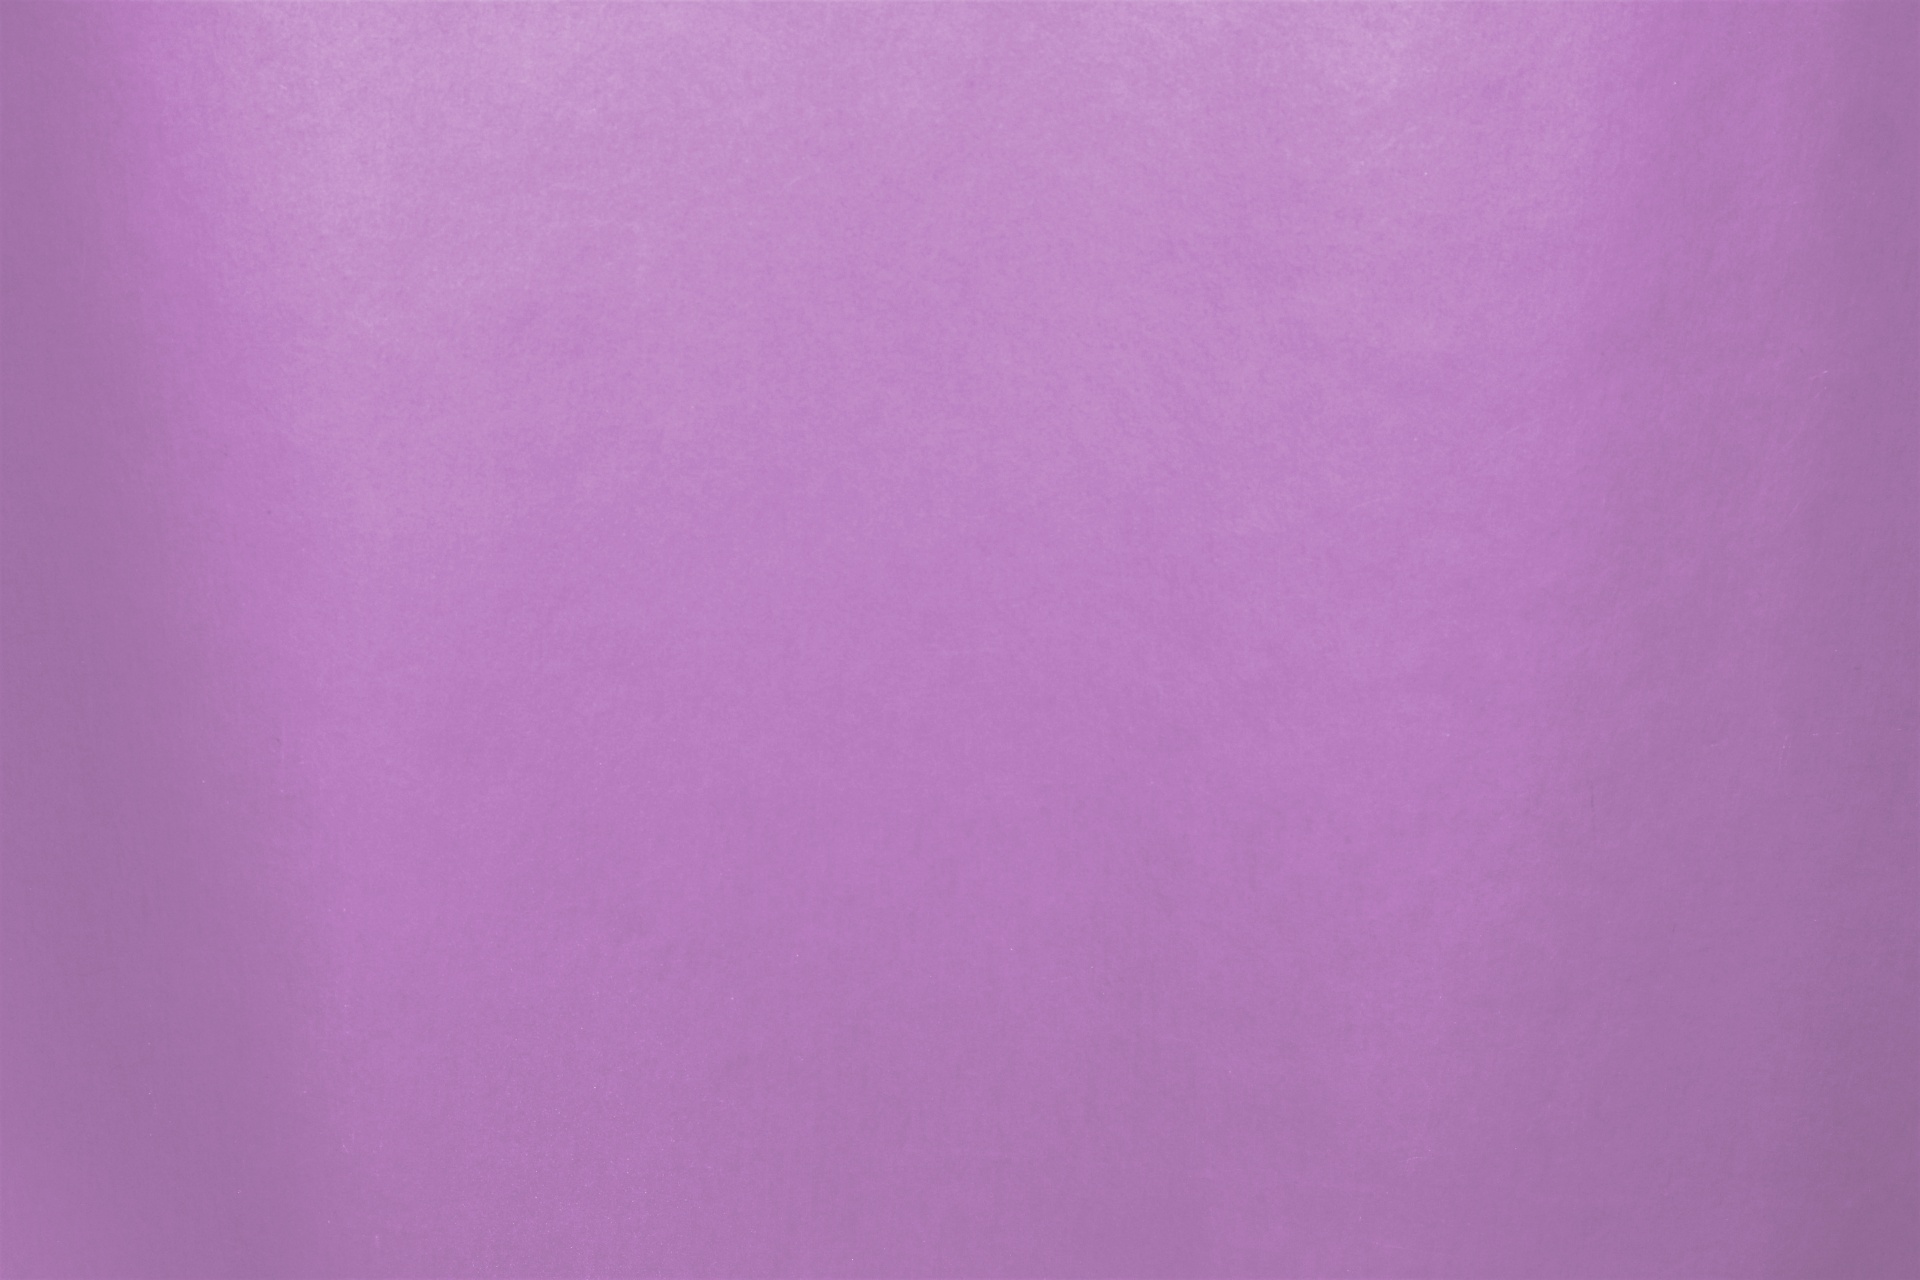 Solid pastel purple smooth background.